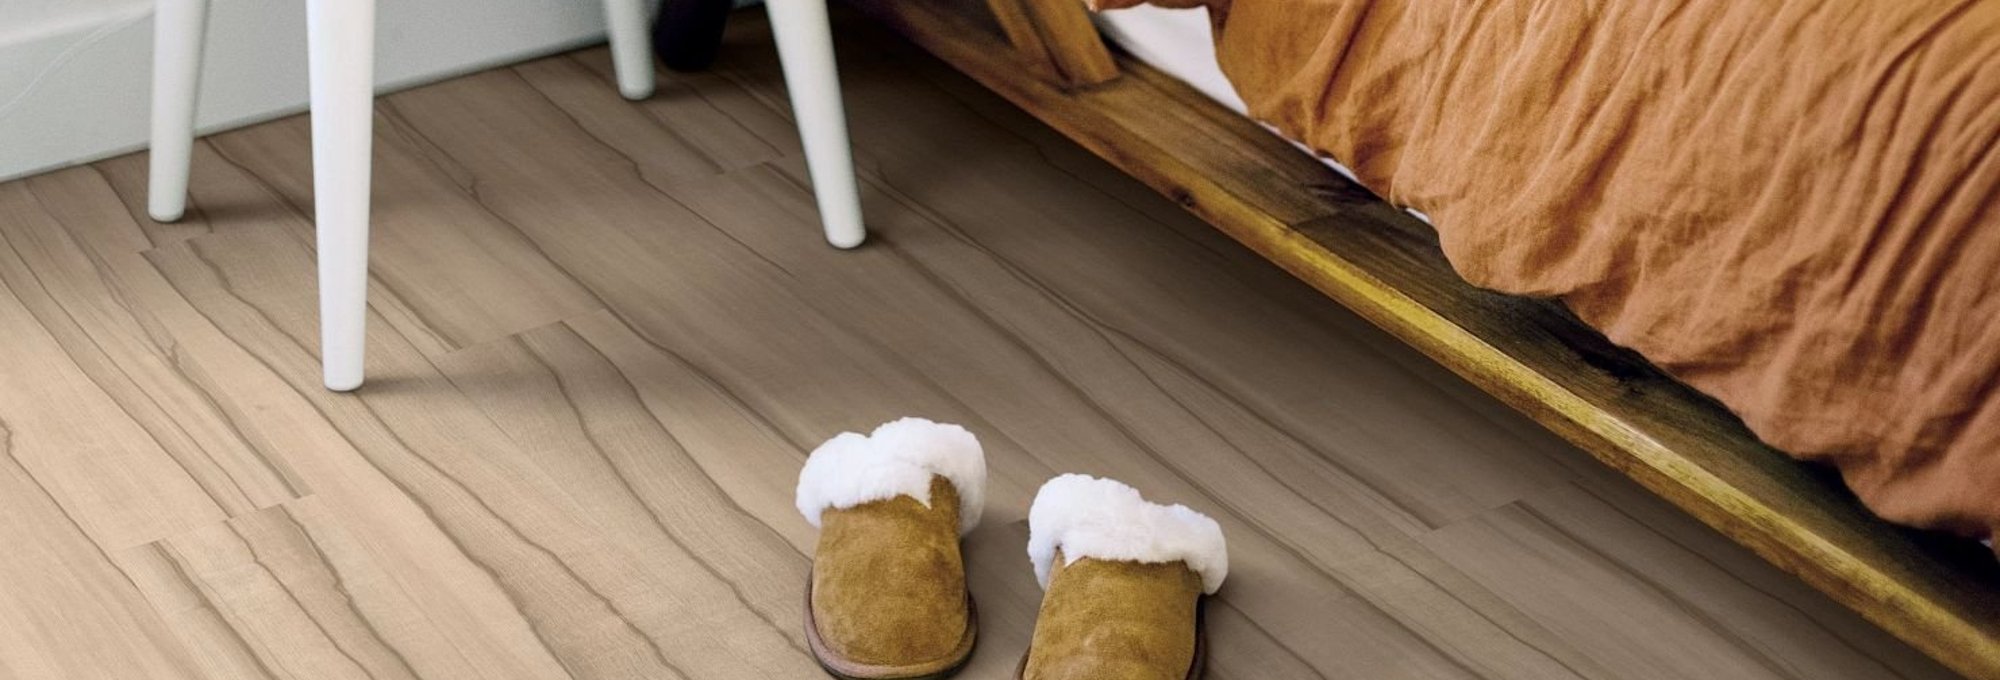 bedroom floor closeup with slippers - USA Carpets in GA